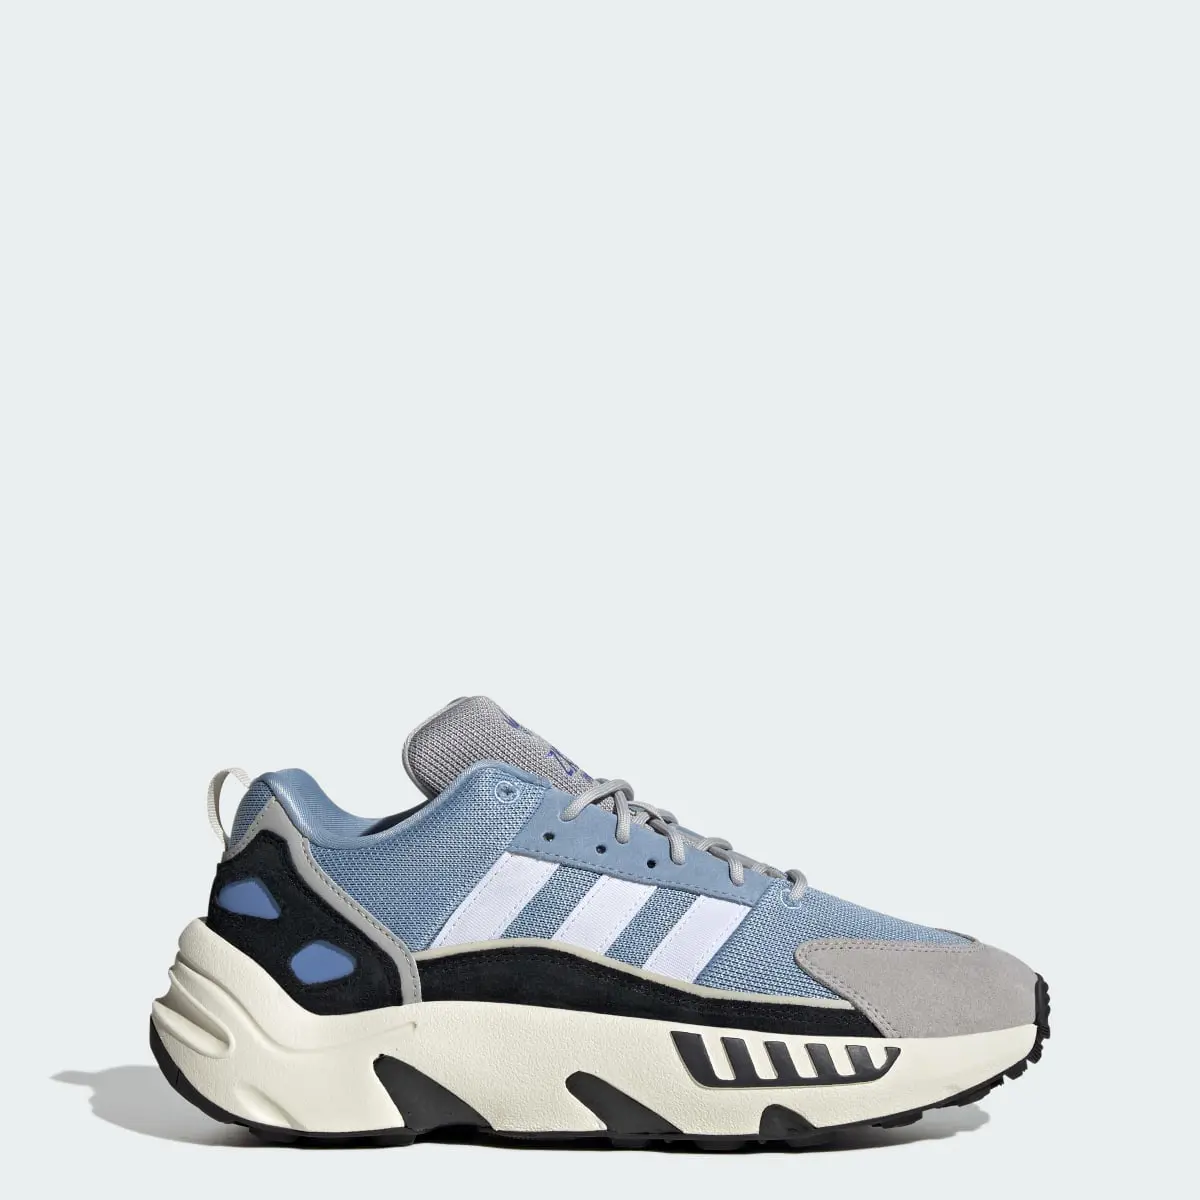 Adidas ZX 22 BOOST Shoes. 1